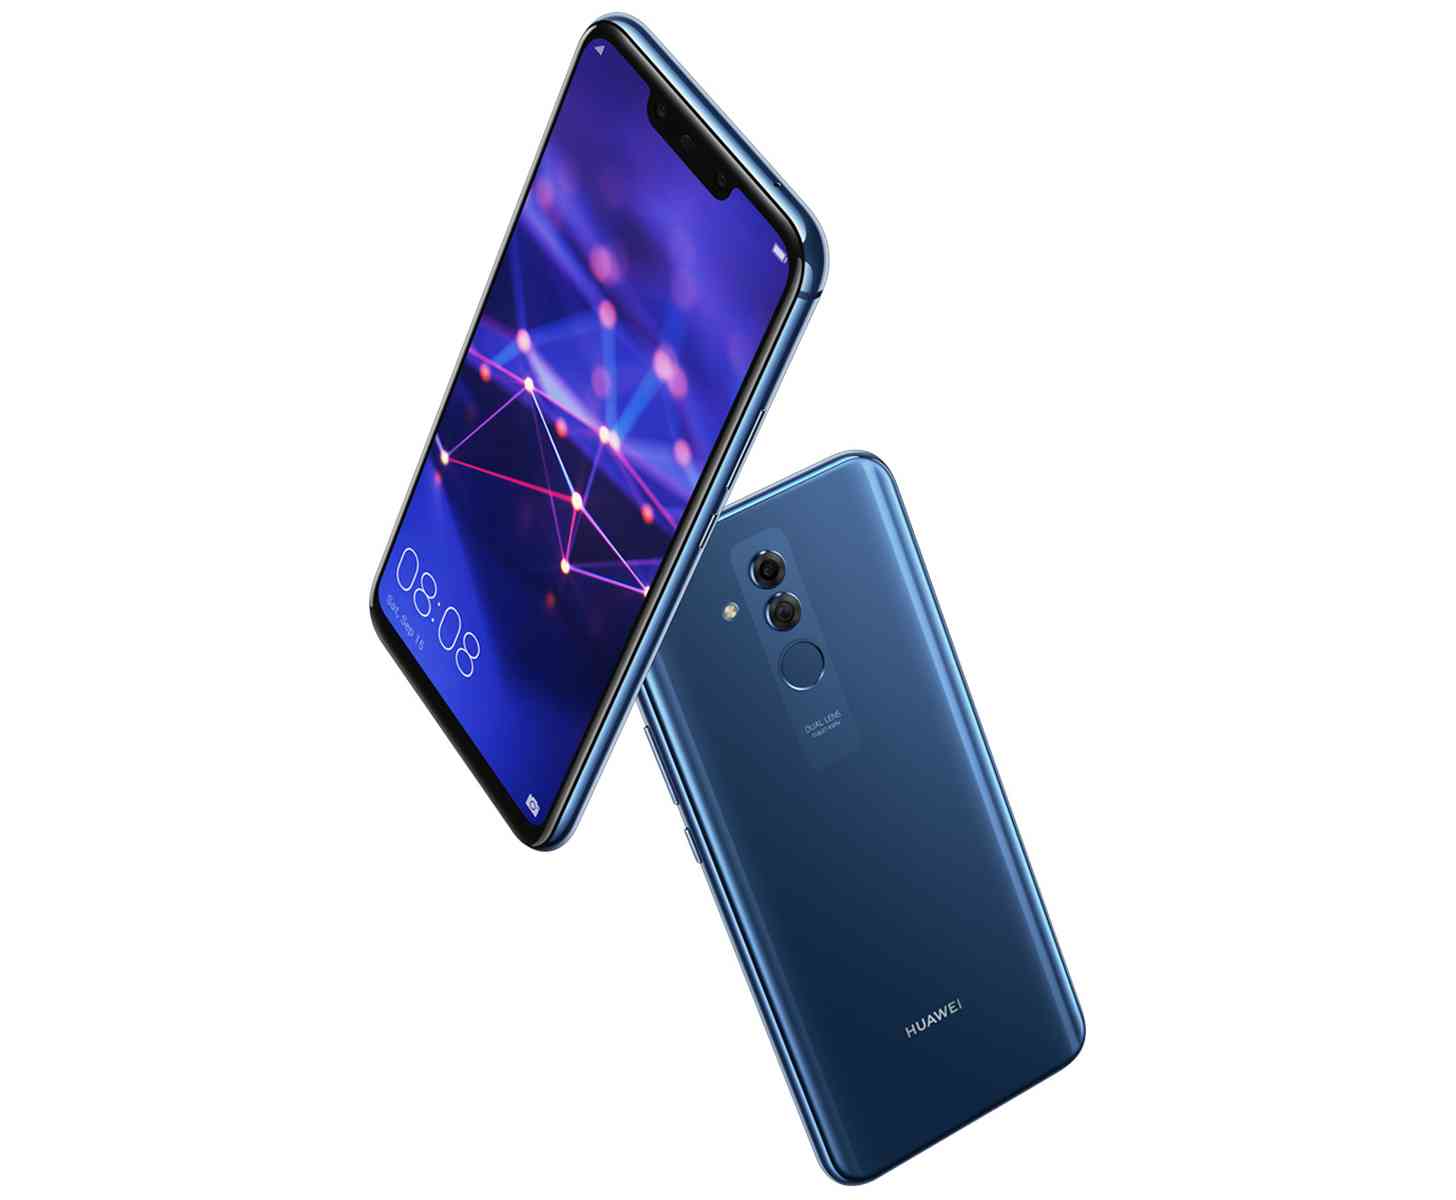 Huawei Mate 20 Lite official